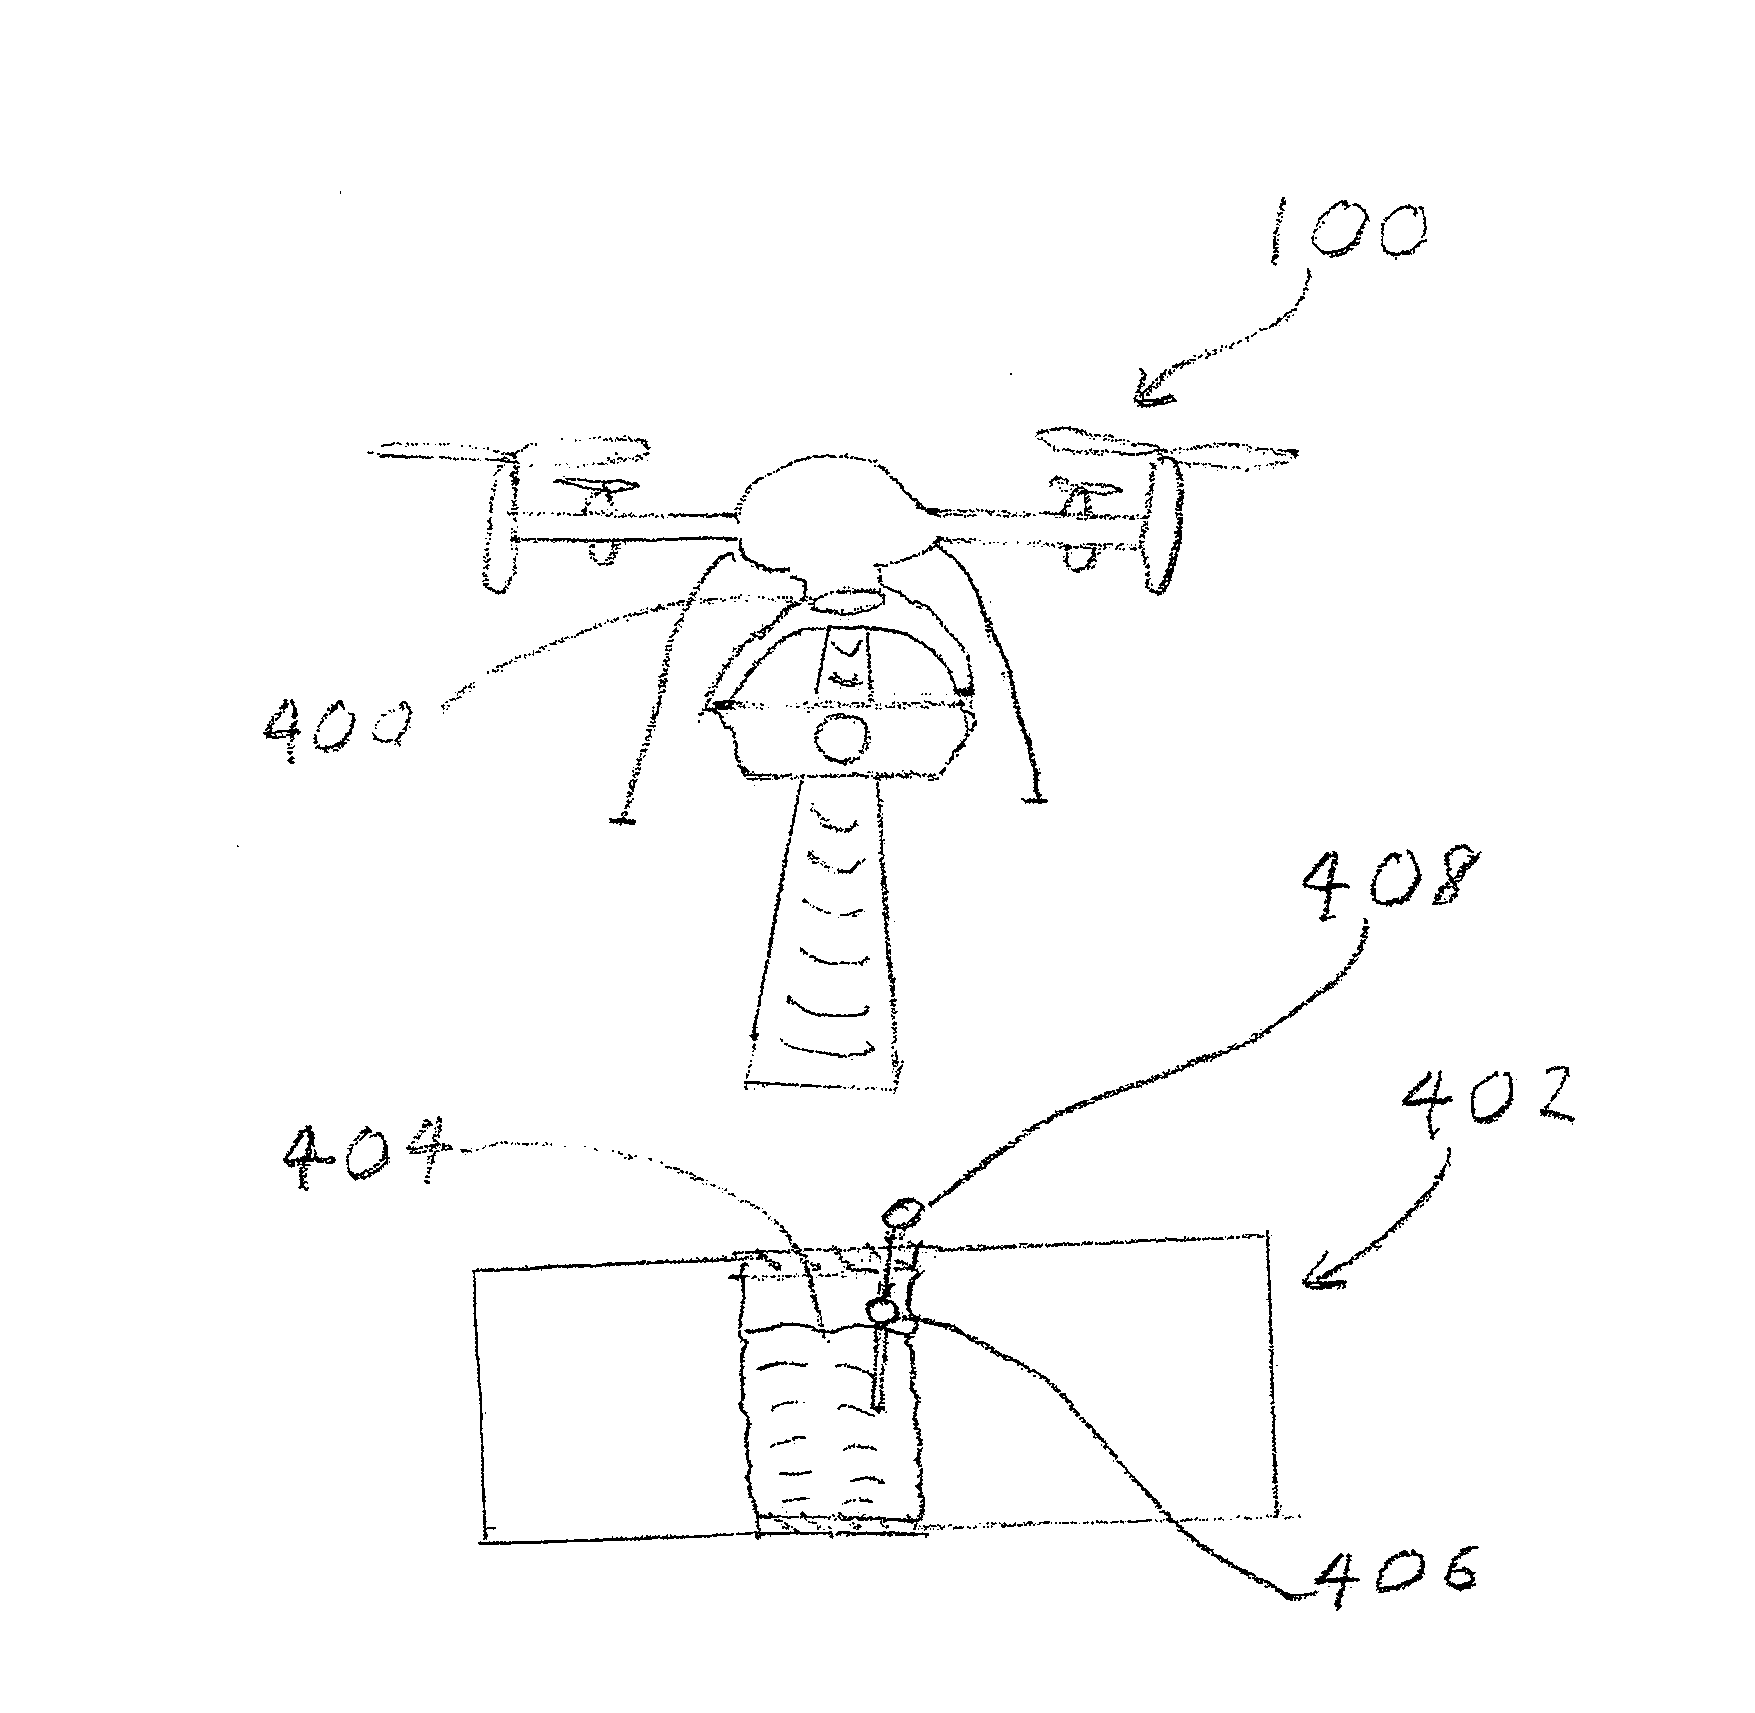 Systems, Methods and Devices for Collecting Data at Remote Oil and Natural Gas Sites